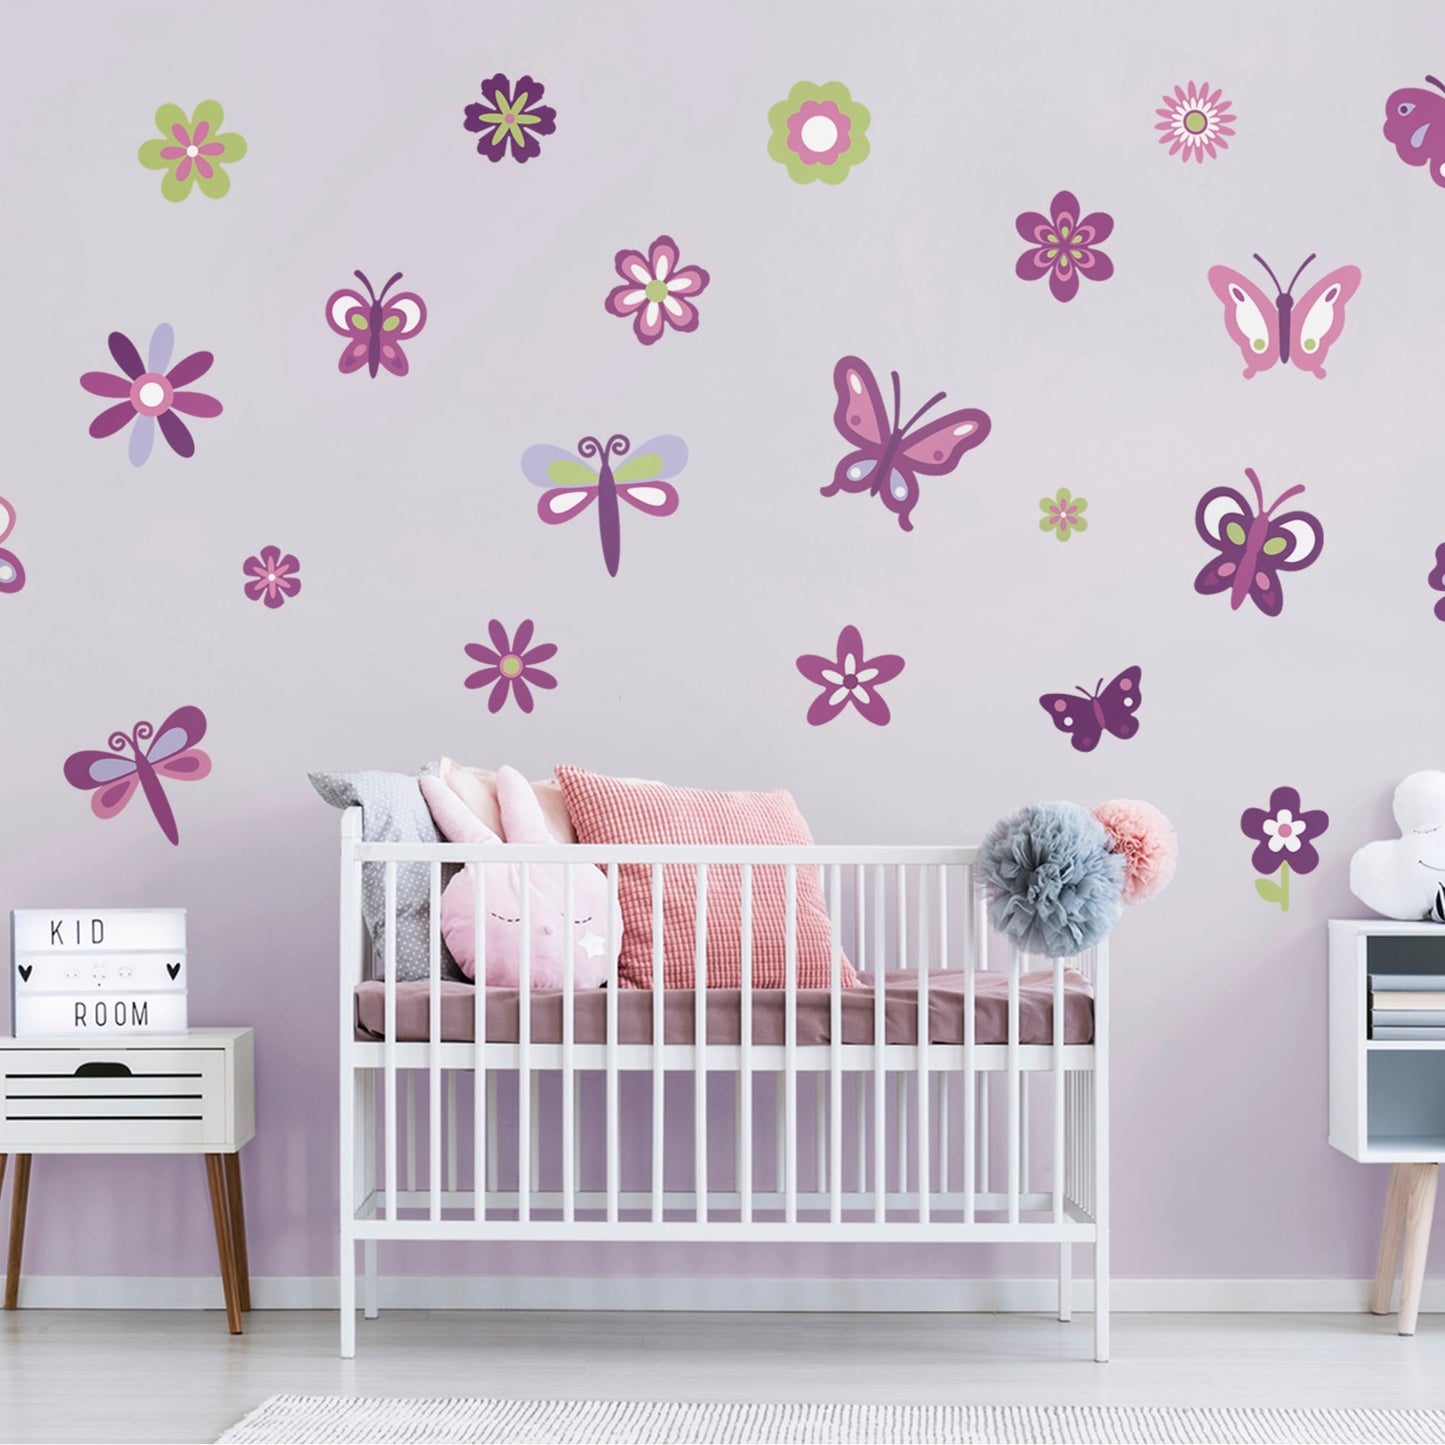 Nursery: Butterfly & Garden Collection - Removable Vinyl Decal